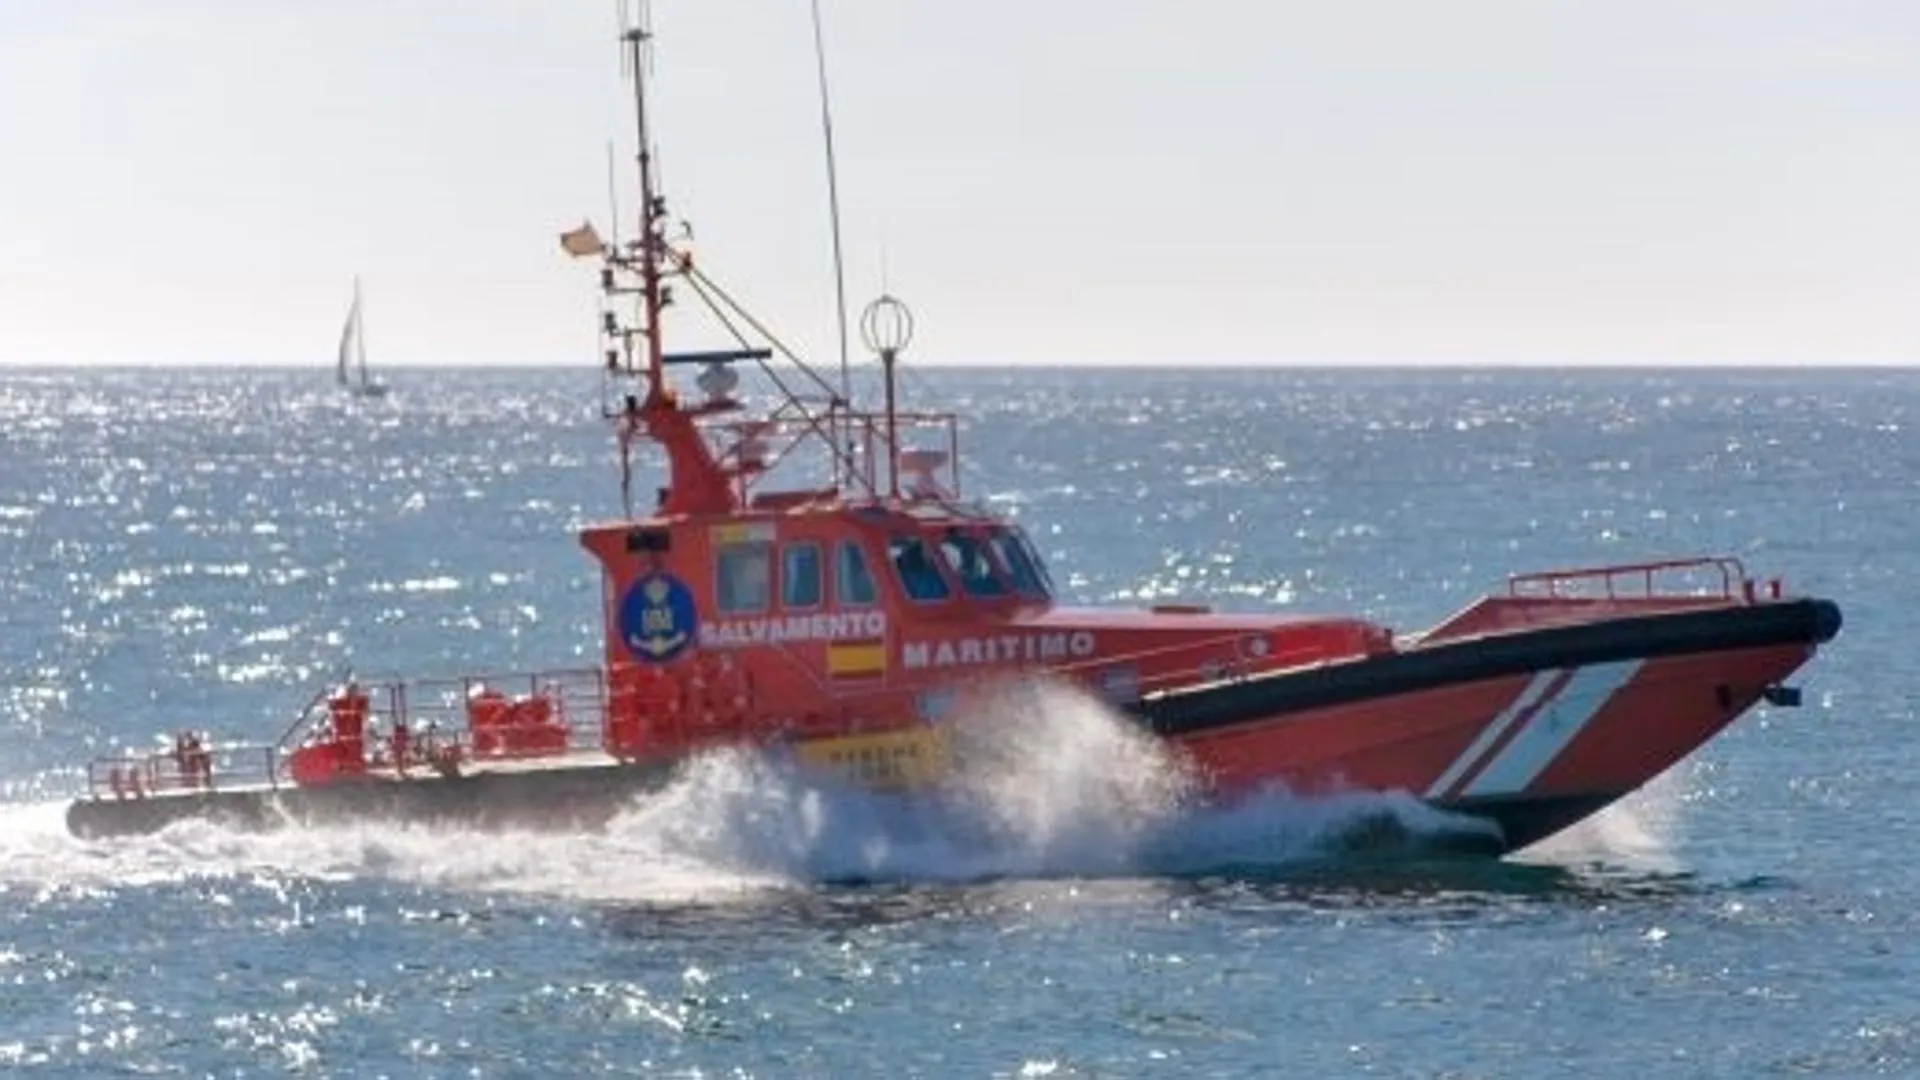 They rescue a canoe with 103 migrants south of Gran Canaria